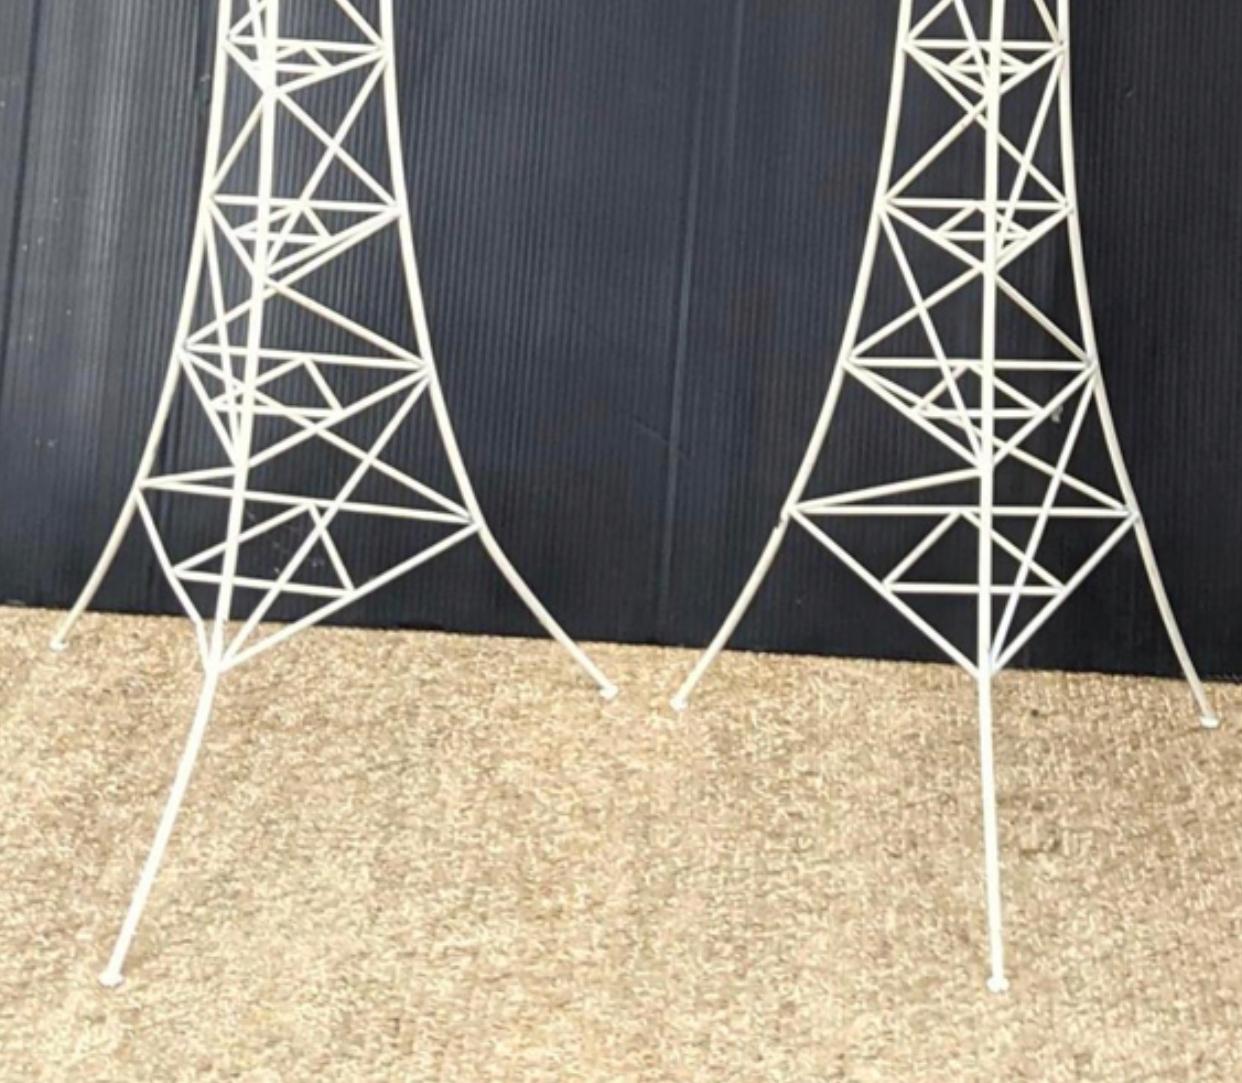 Unusual and unique Eiffel Tower style floor lamps. Wire rod framing with white coating. Wear and tear including paint loss. Lamps will need to be rewired and could be recoated. Sold as is for reimagination.